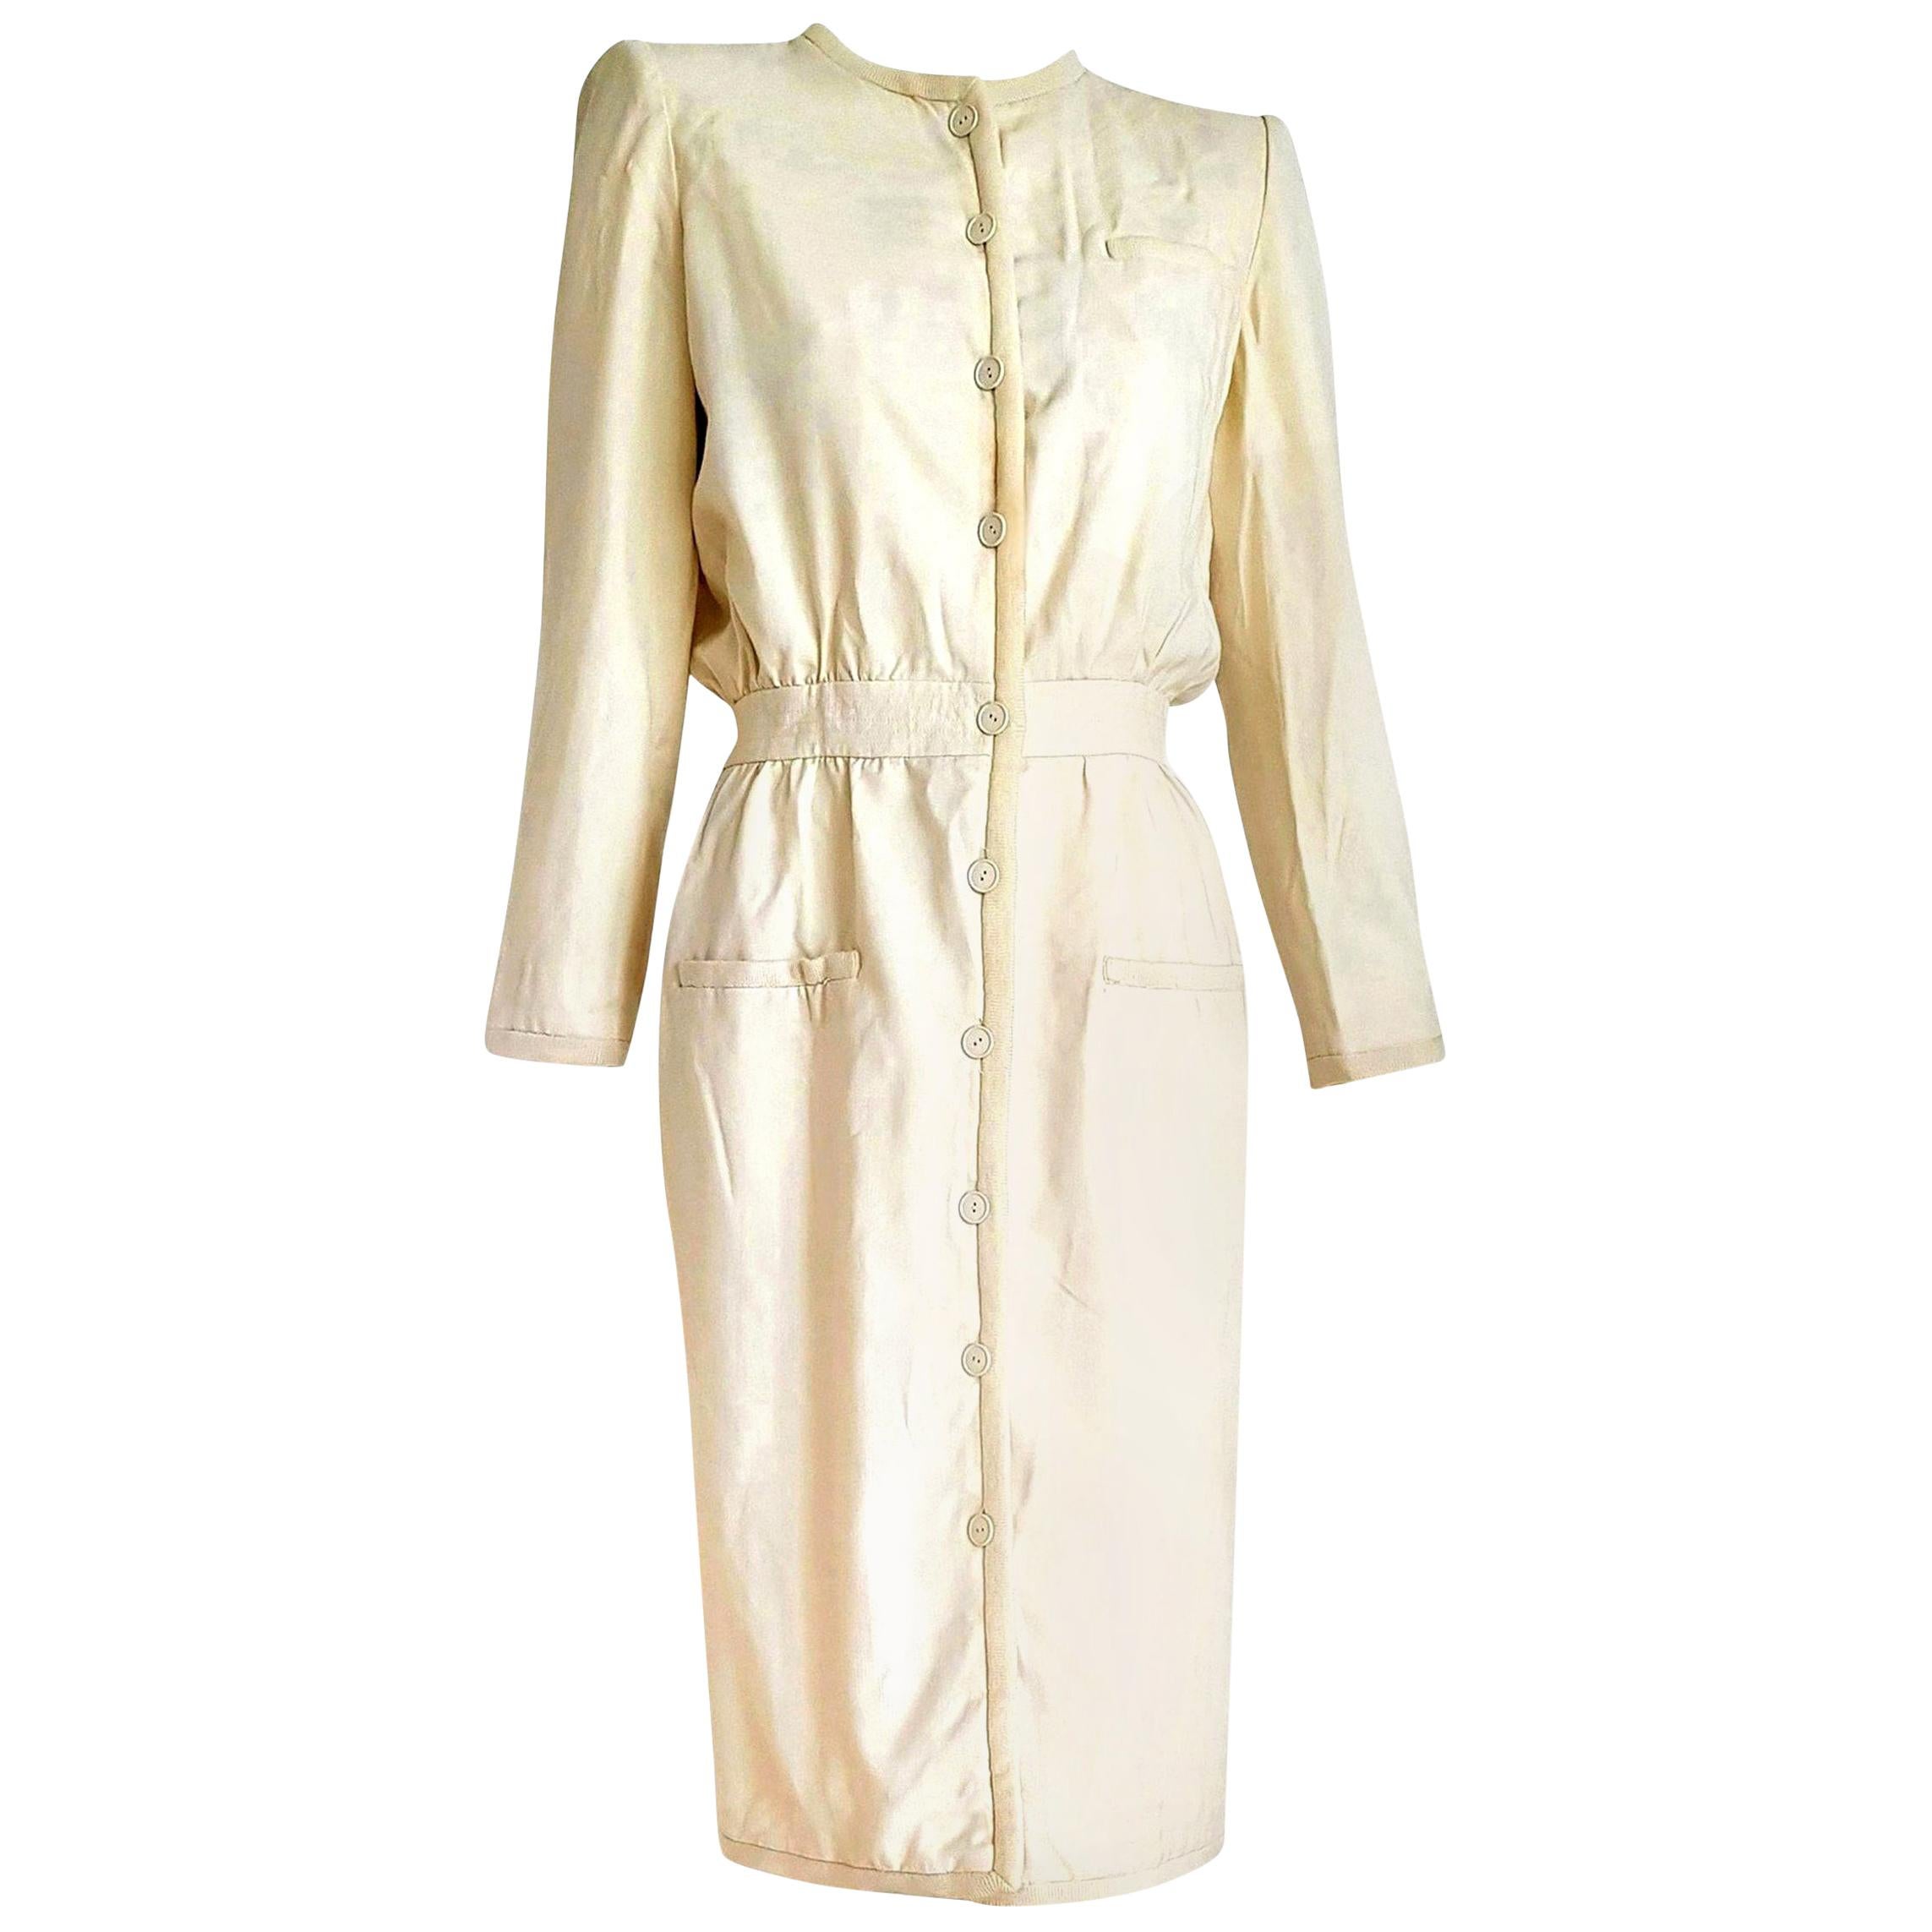 VALENTINO "New" White Cream Silk and Wool Silk Lined Buttons Dress - Unworn For Sale